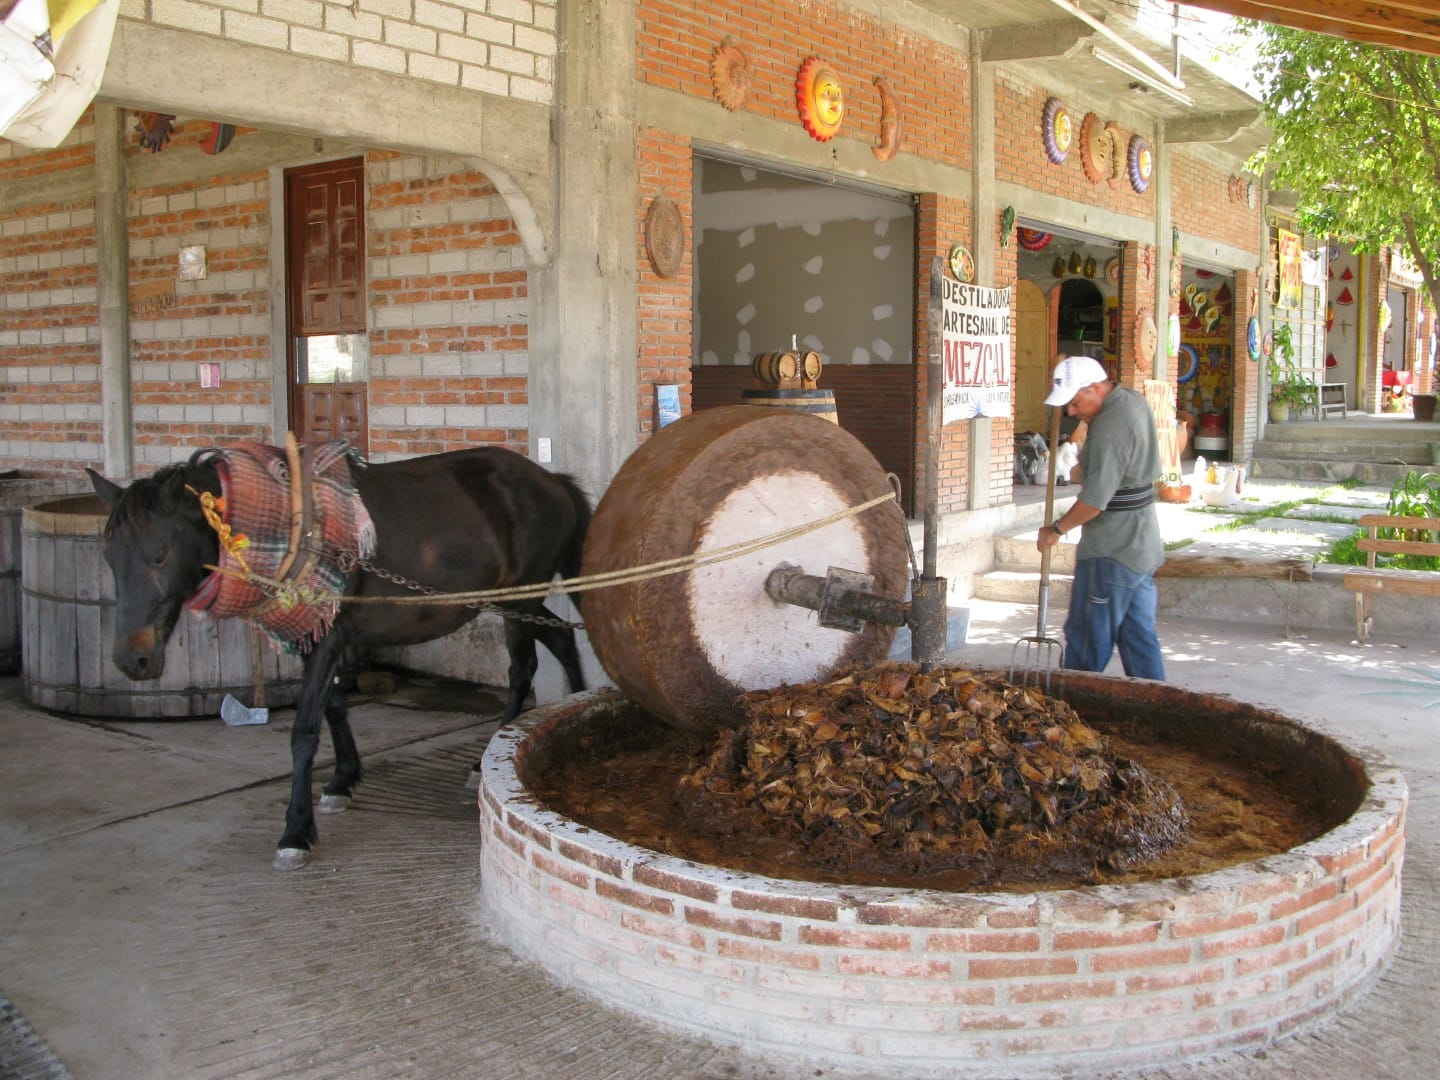 As it was done in centuries past, grinding palm for mezcal.